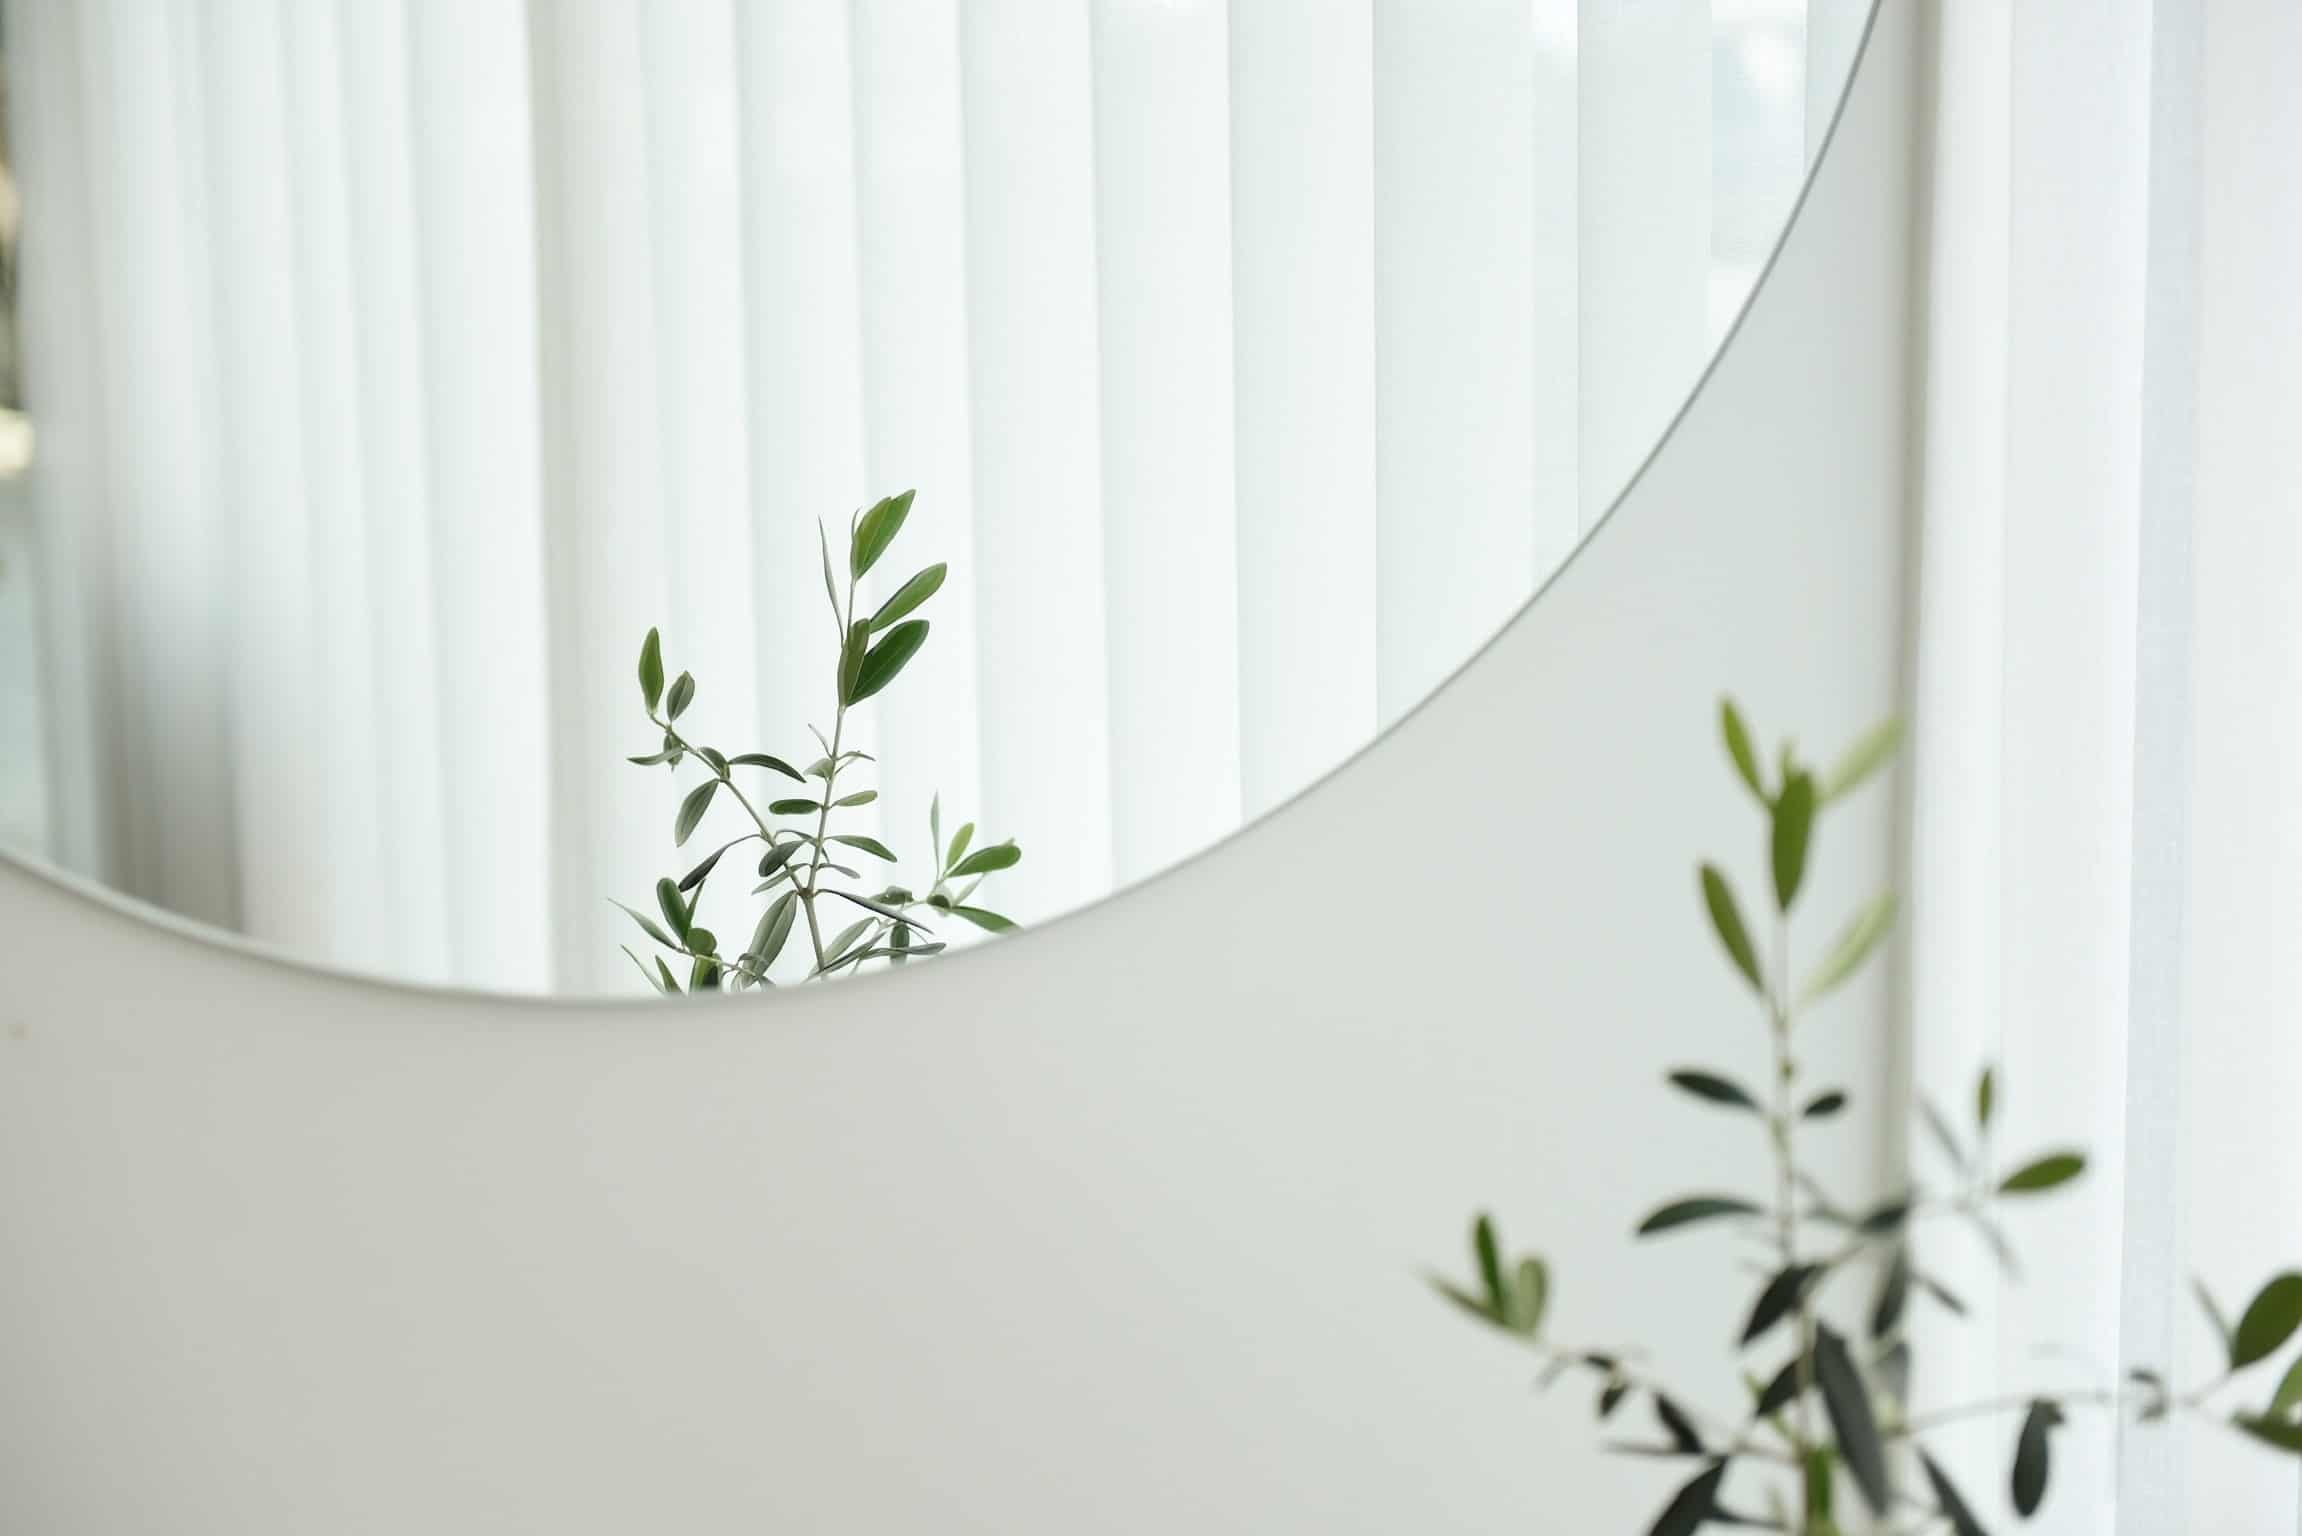 Mirror to the hallway – which one to choose?